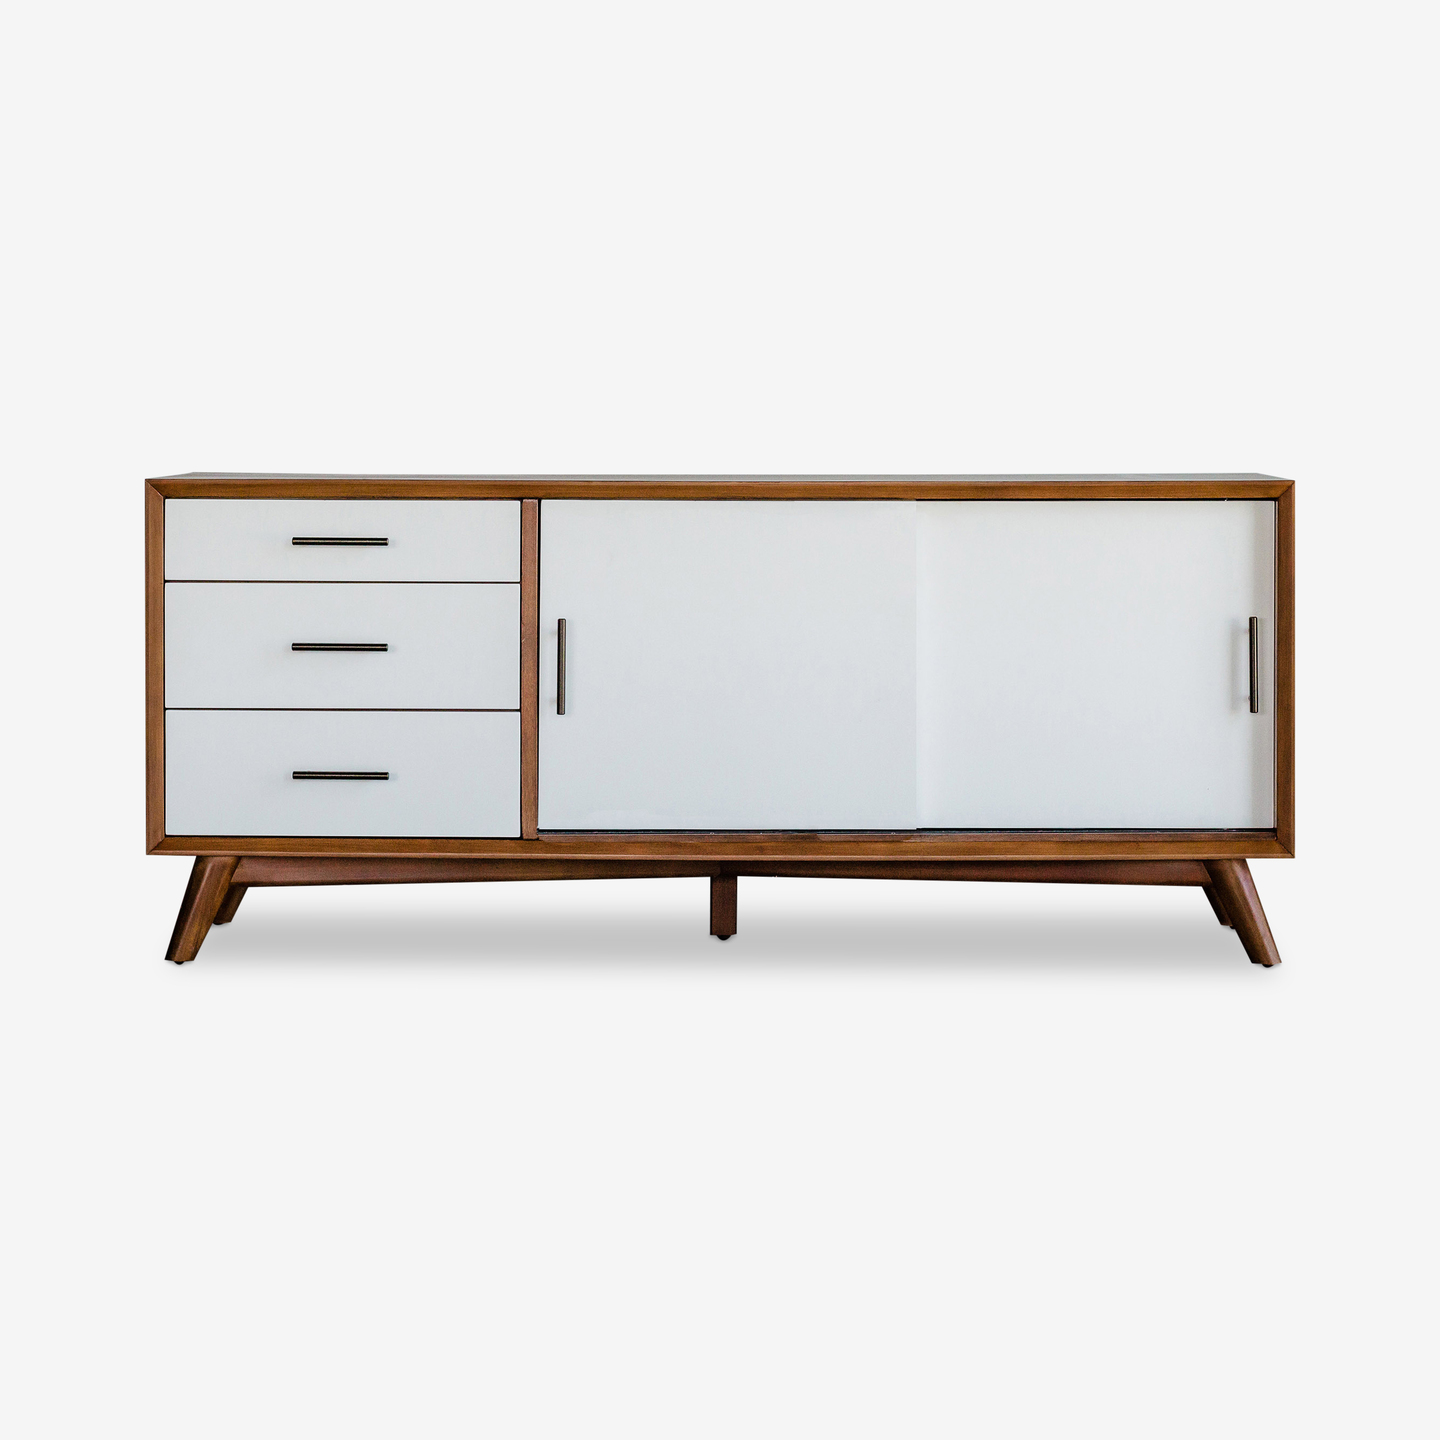 1595_Cheney-Media-Console-Extended-Acorn-White_front_2021